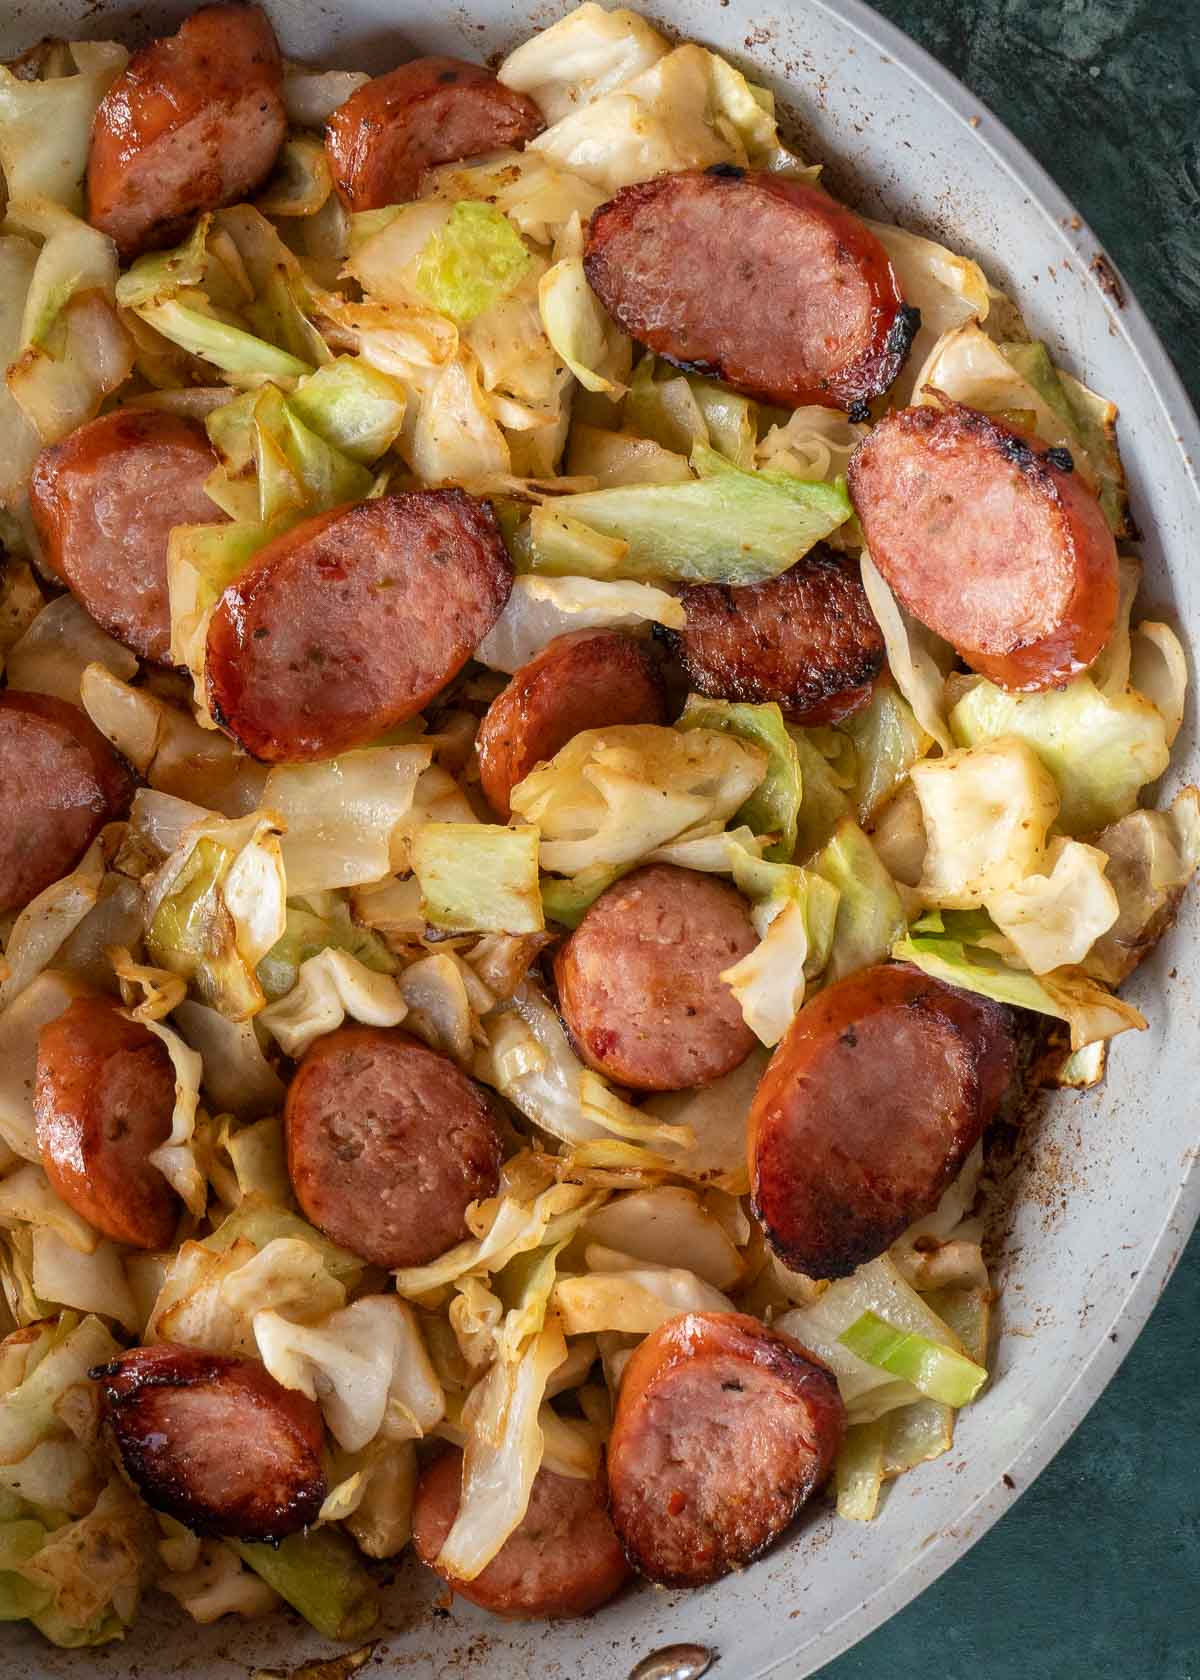 Need an easy low carb, one-pan dinner? I've got you covered! This Keto Sausage and Cabbage Skillet is ready in under 20 minutes and has less than 6 carbs per serving!